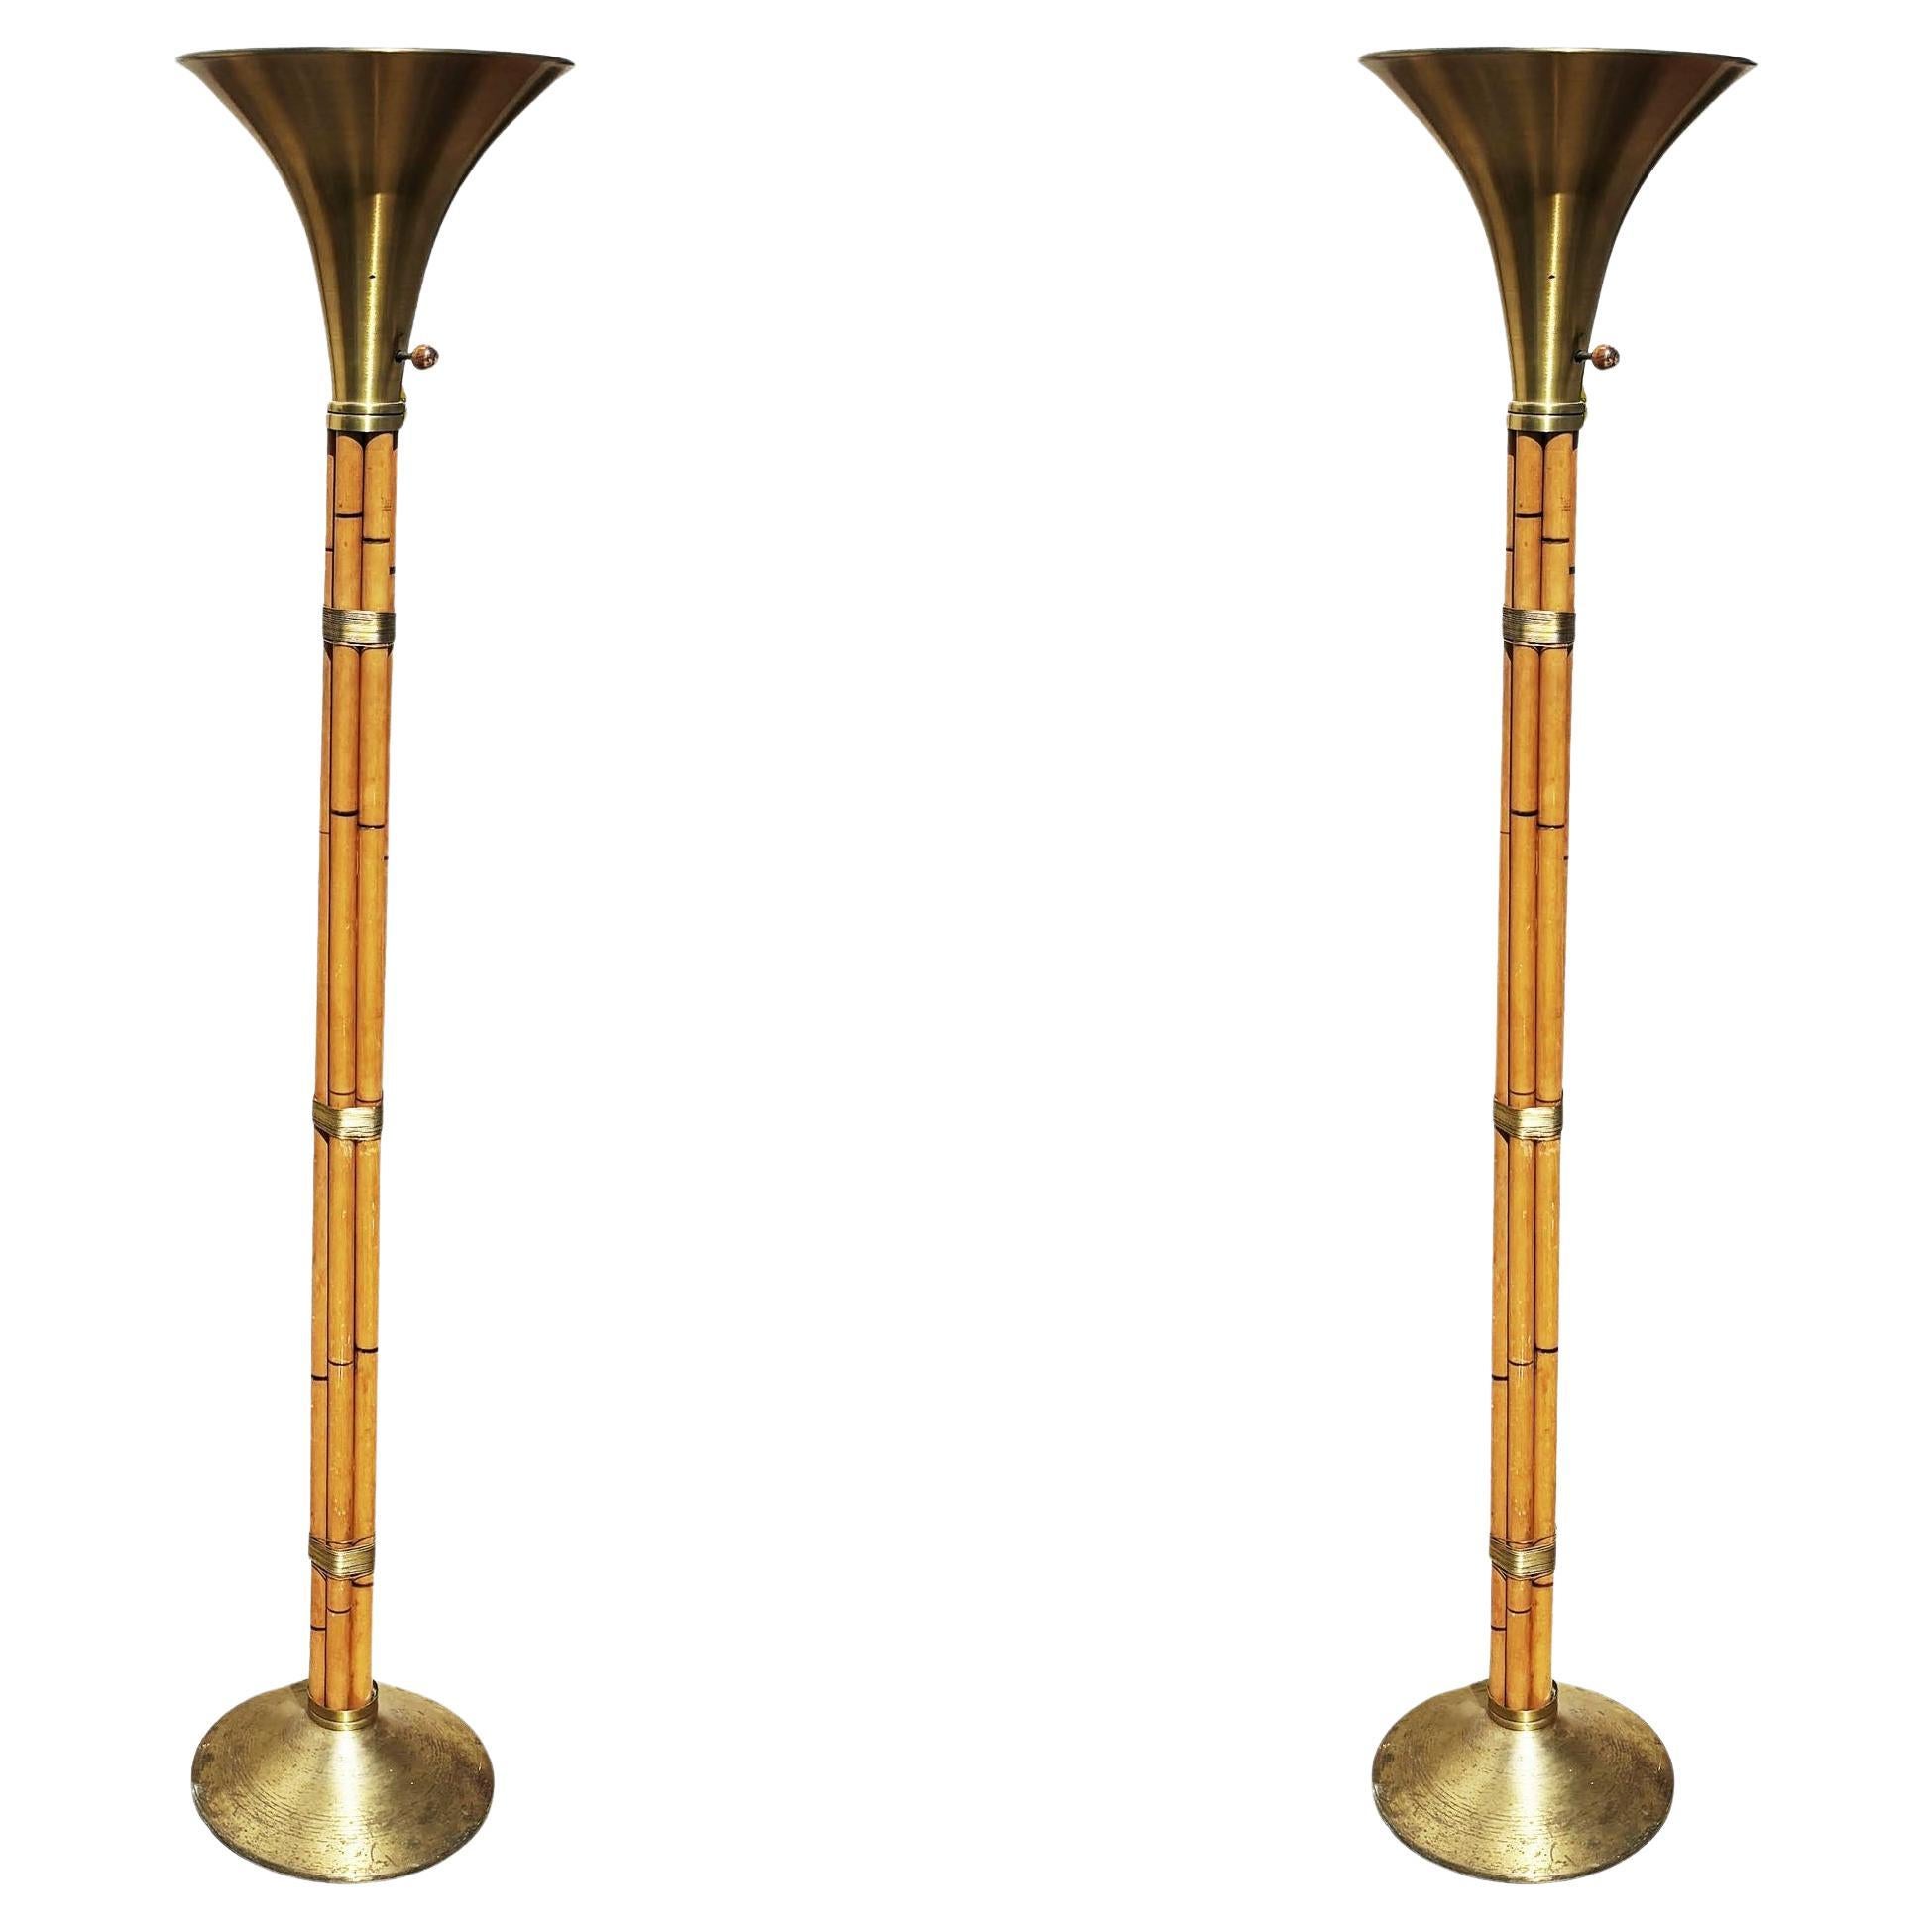 Restored Stacked Rattan Torchère Floor Lamps Brass Shade by Russel Wright, Pair